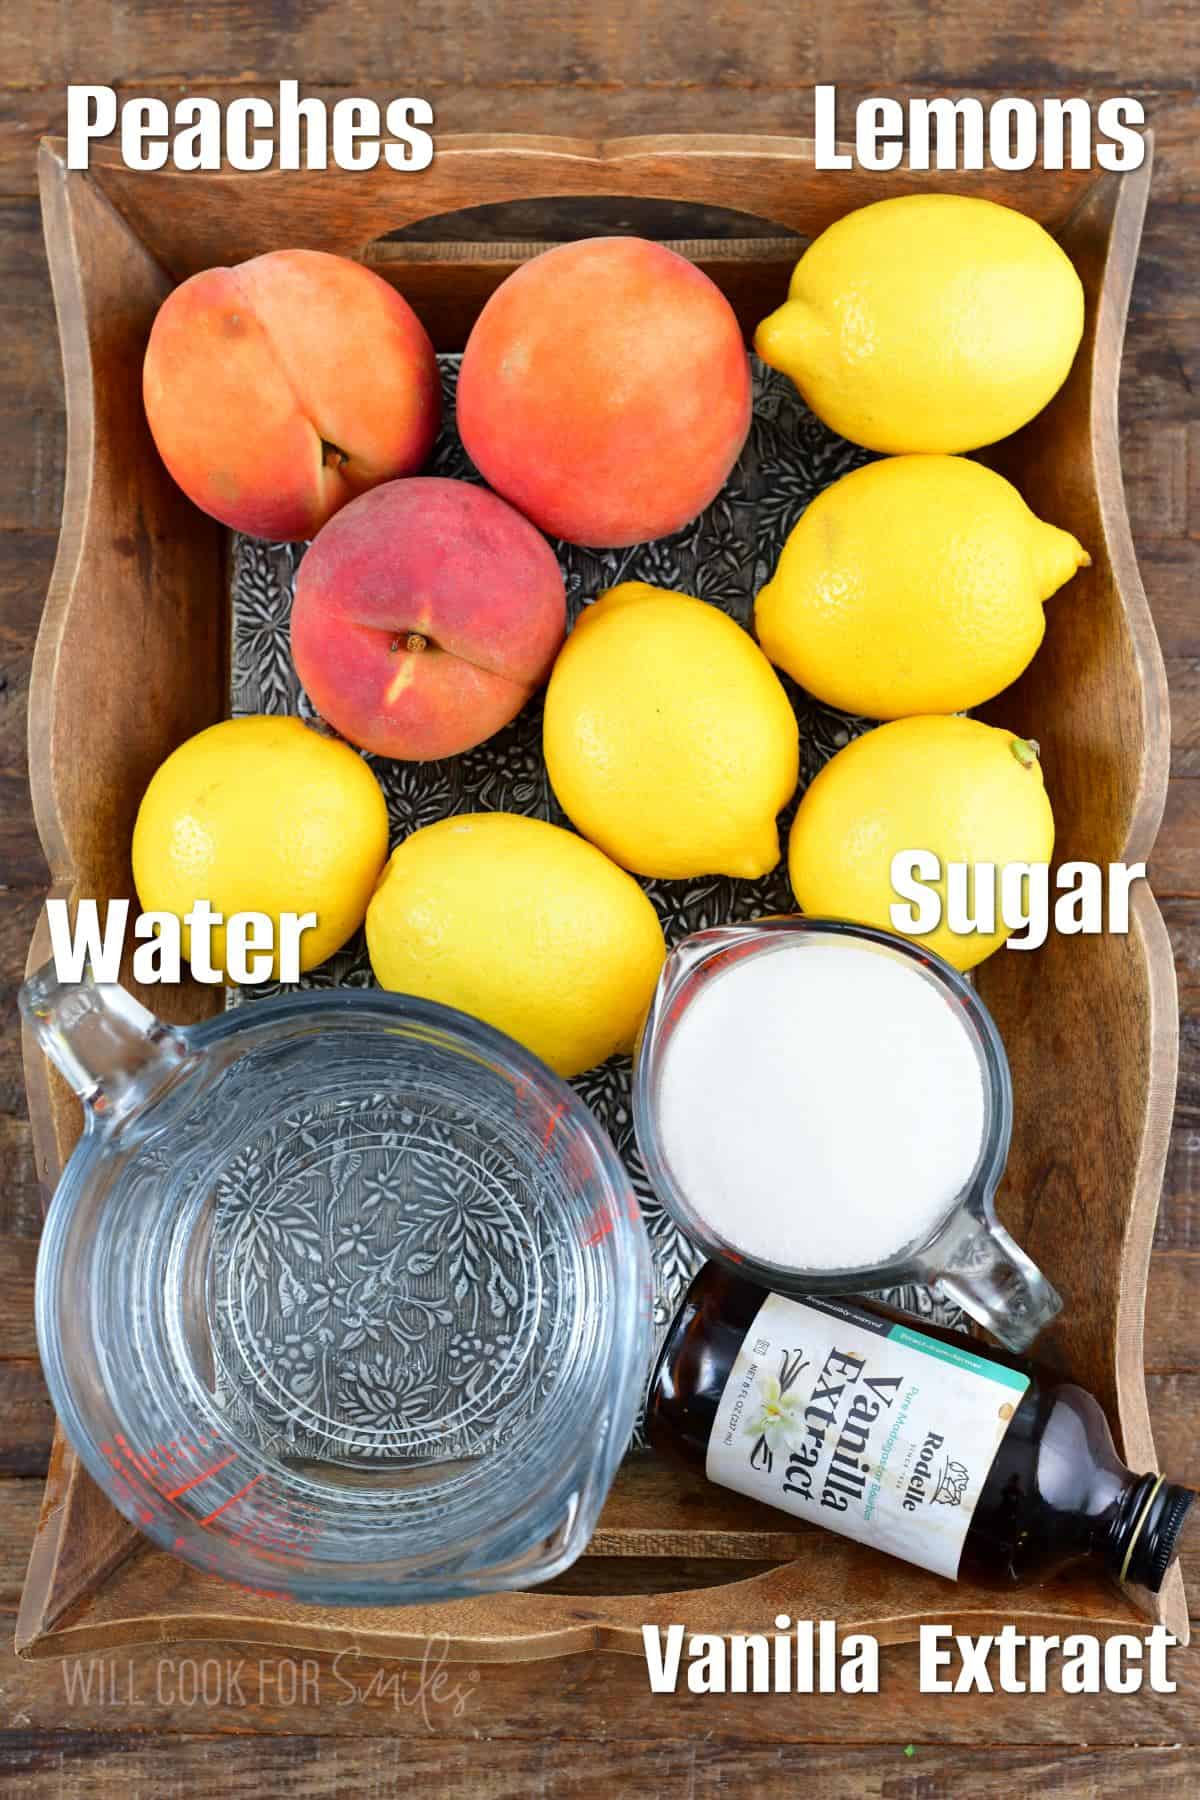 labeled ingredients to make peach lemonade on w wooden tray.